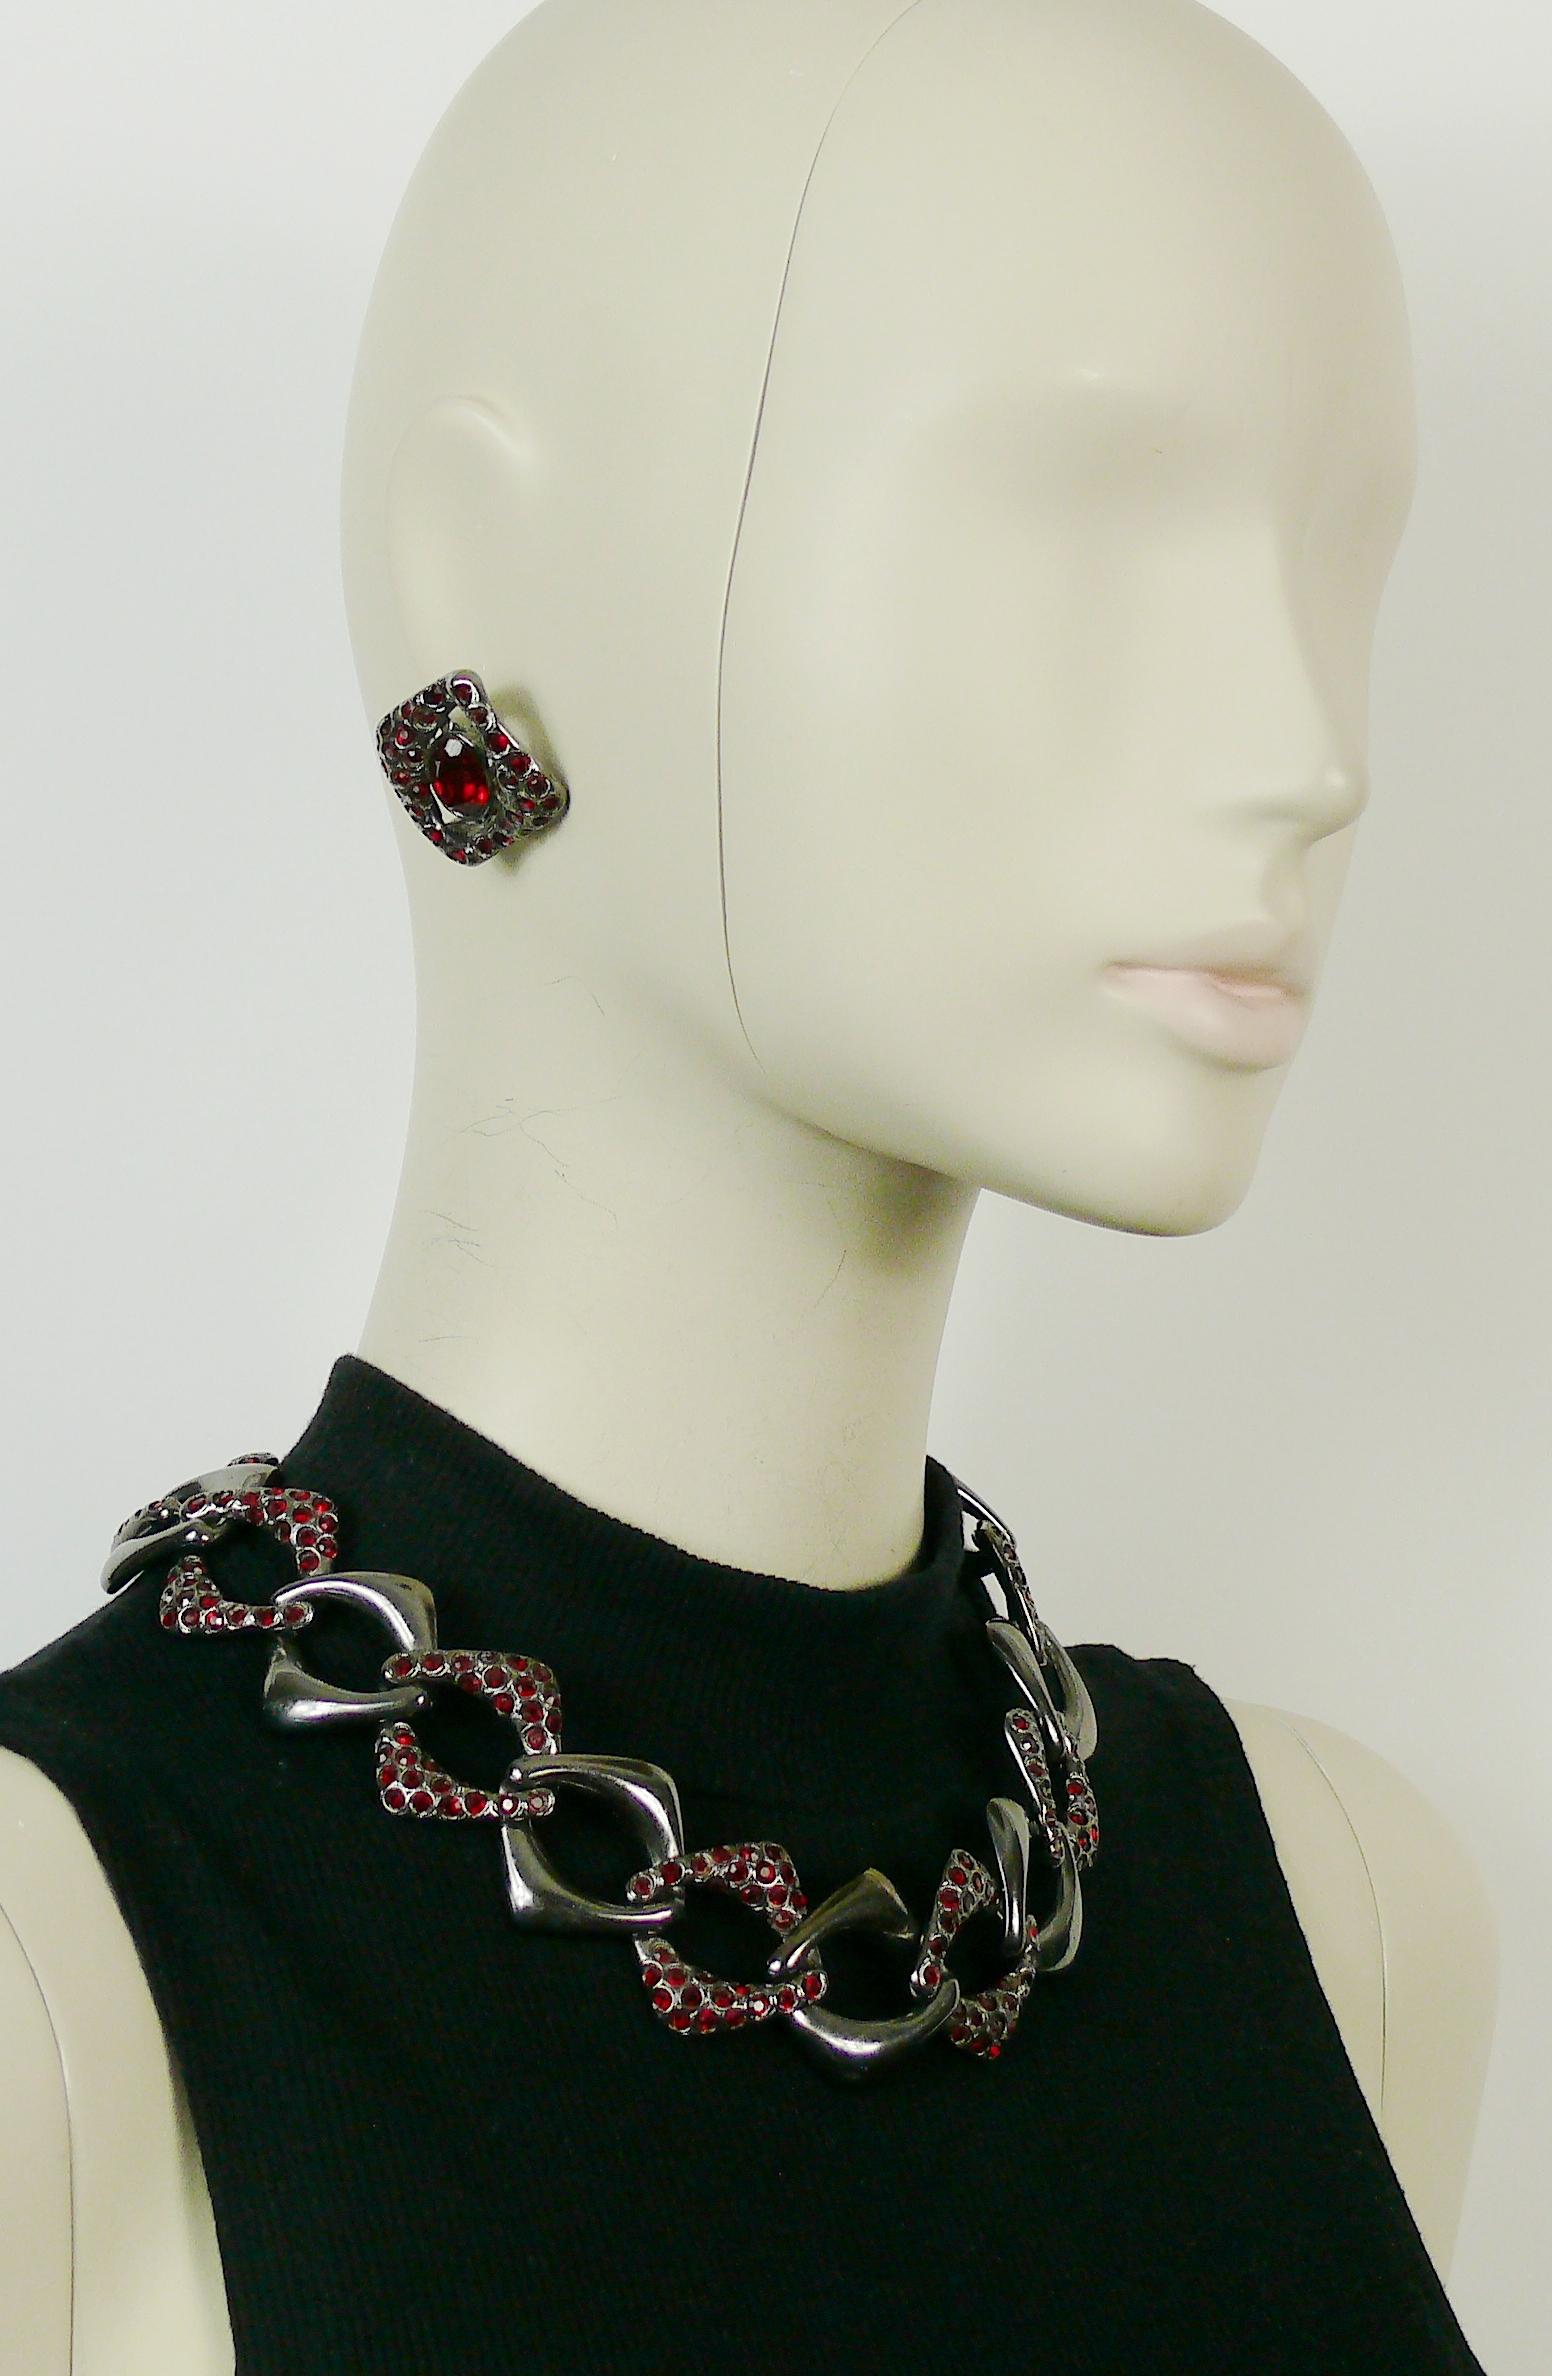 YVES SAINT LAURENT vintage gun patina chain link necklace and clip-on earring set embellished with ruby crystals.

Embossed YSL Made in France.

NECKLACE indicative measurements : adjustable length from approx. 43 cm (16.93 inches) to approx. 48 cm